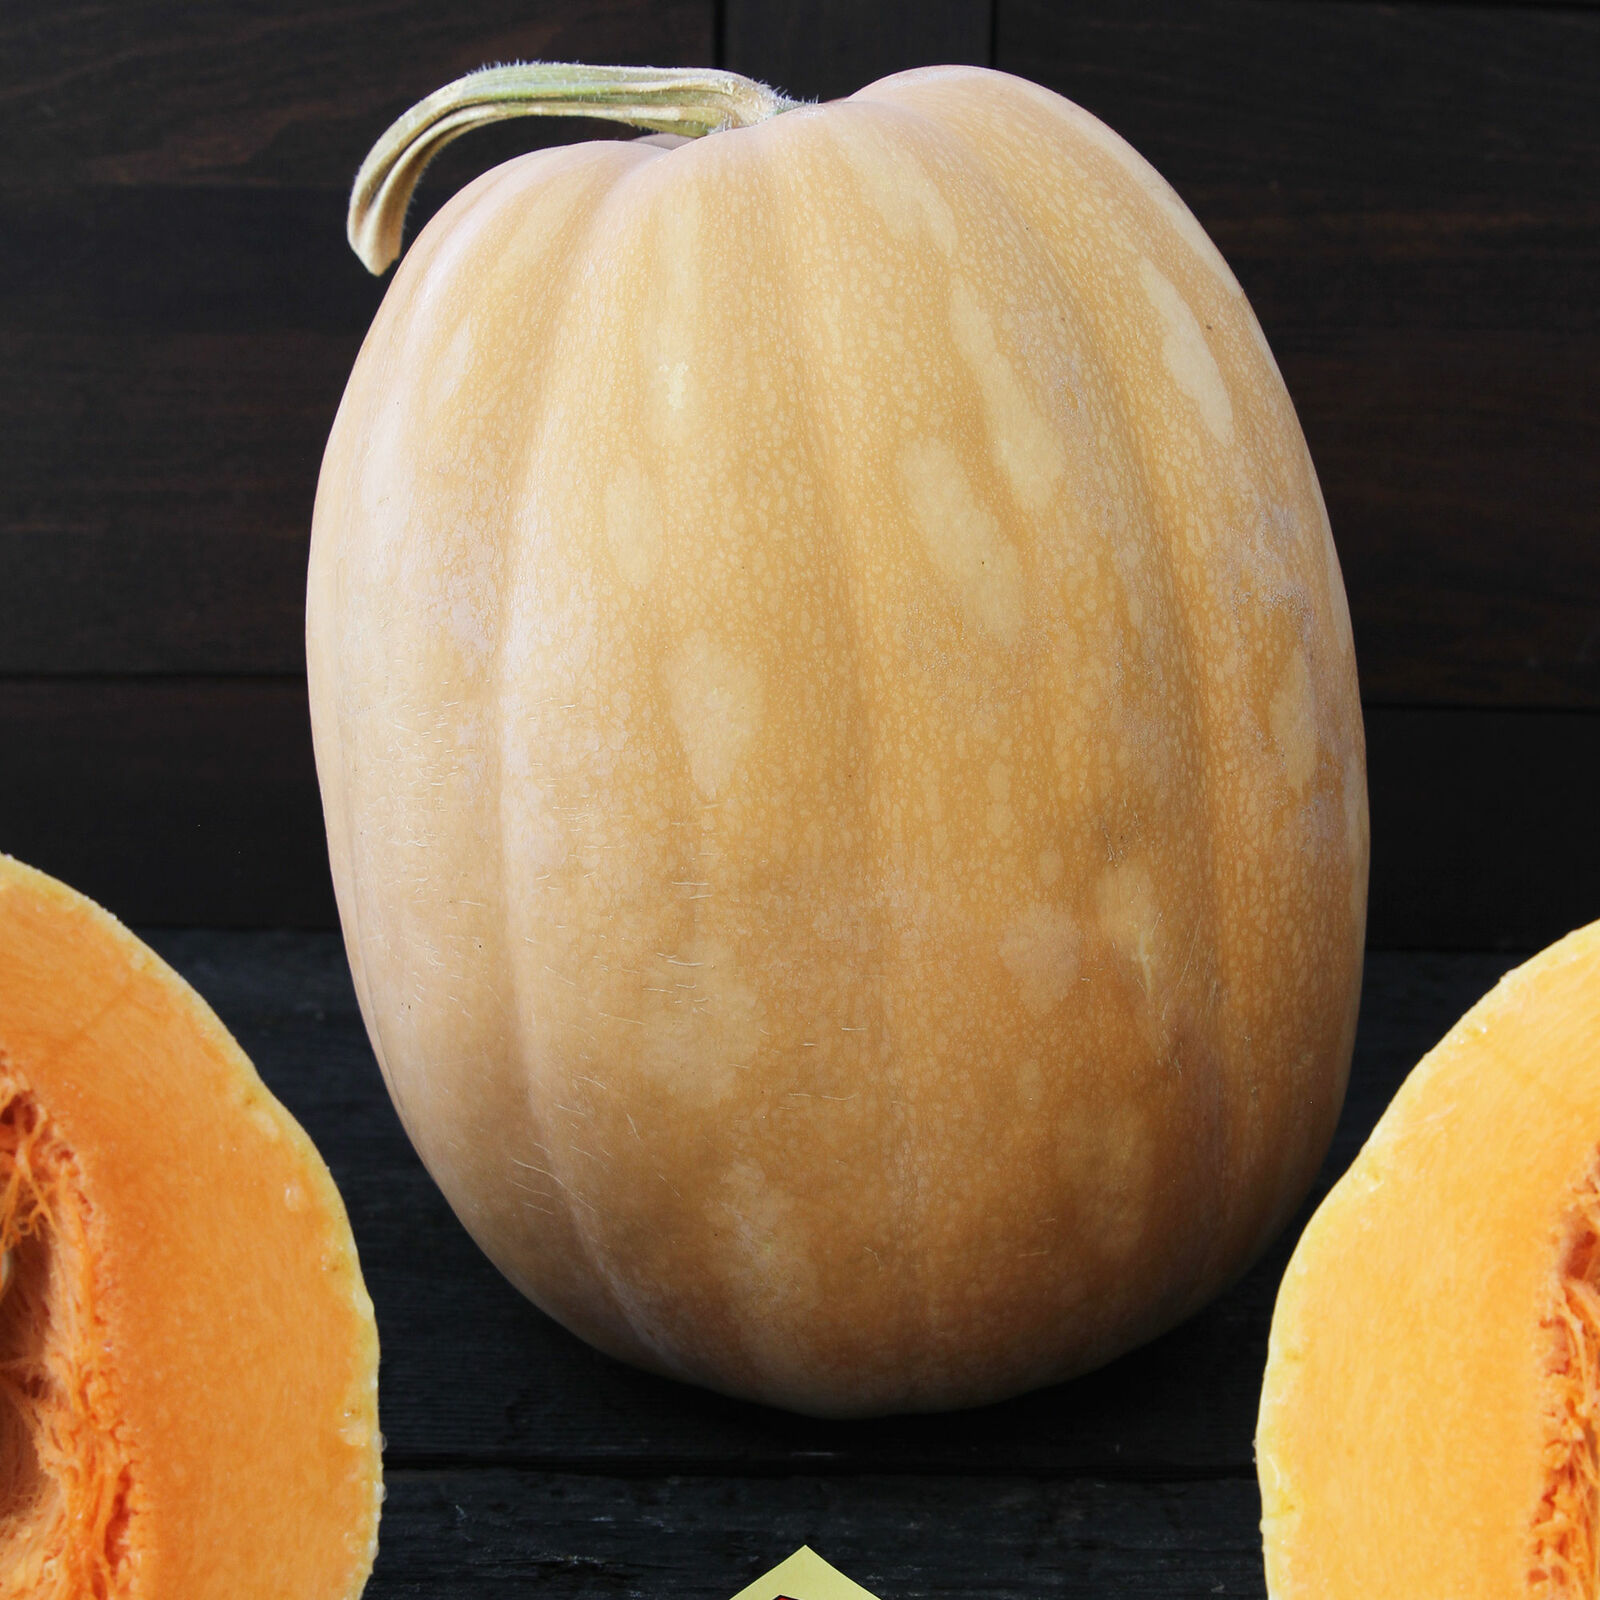 Primary image for SHIP FROM US 4 G ~44 SEEDS - ORGANIC DICKINSON PUMPKIN SEEDS - NON-GMO, TM11